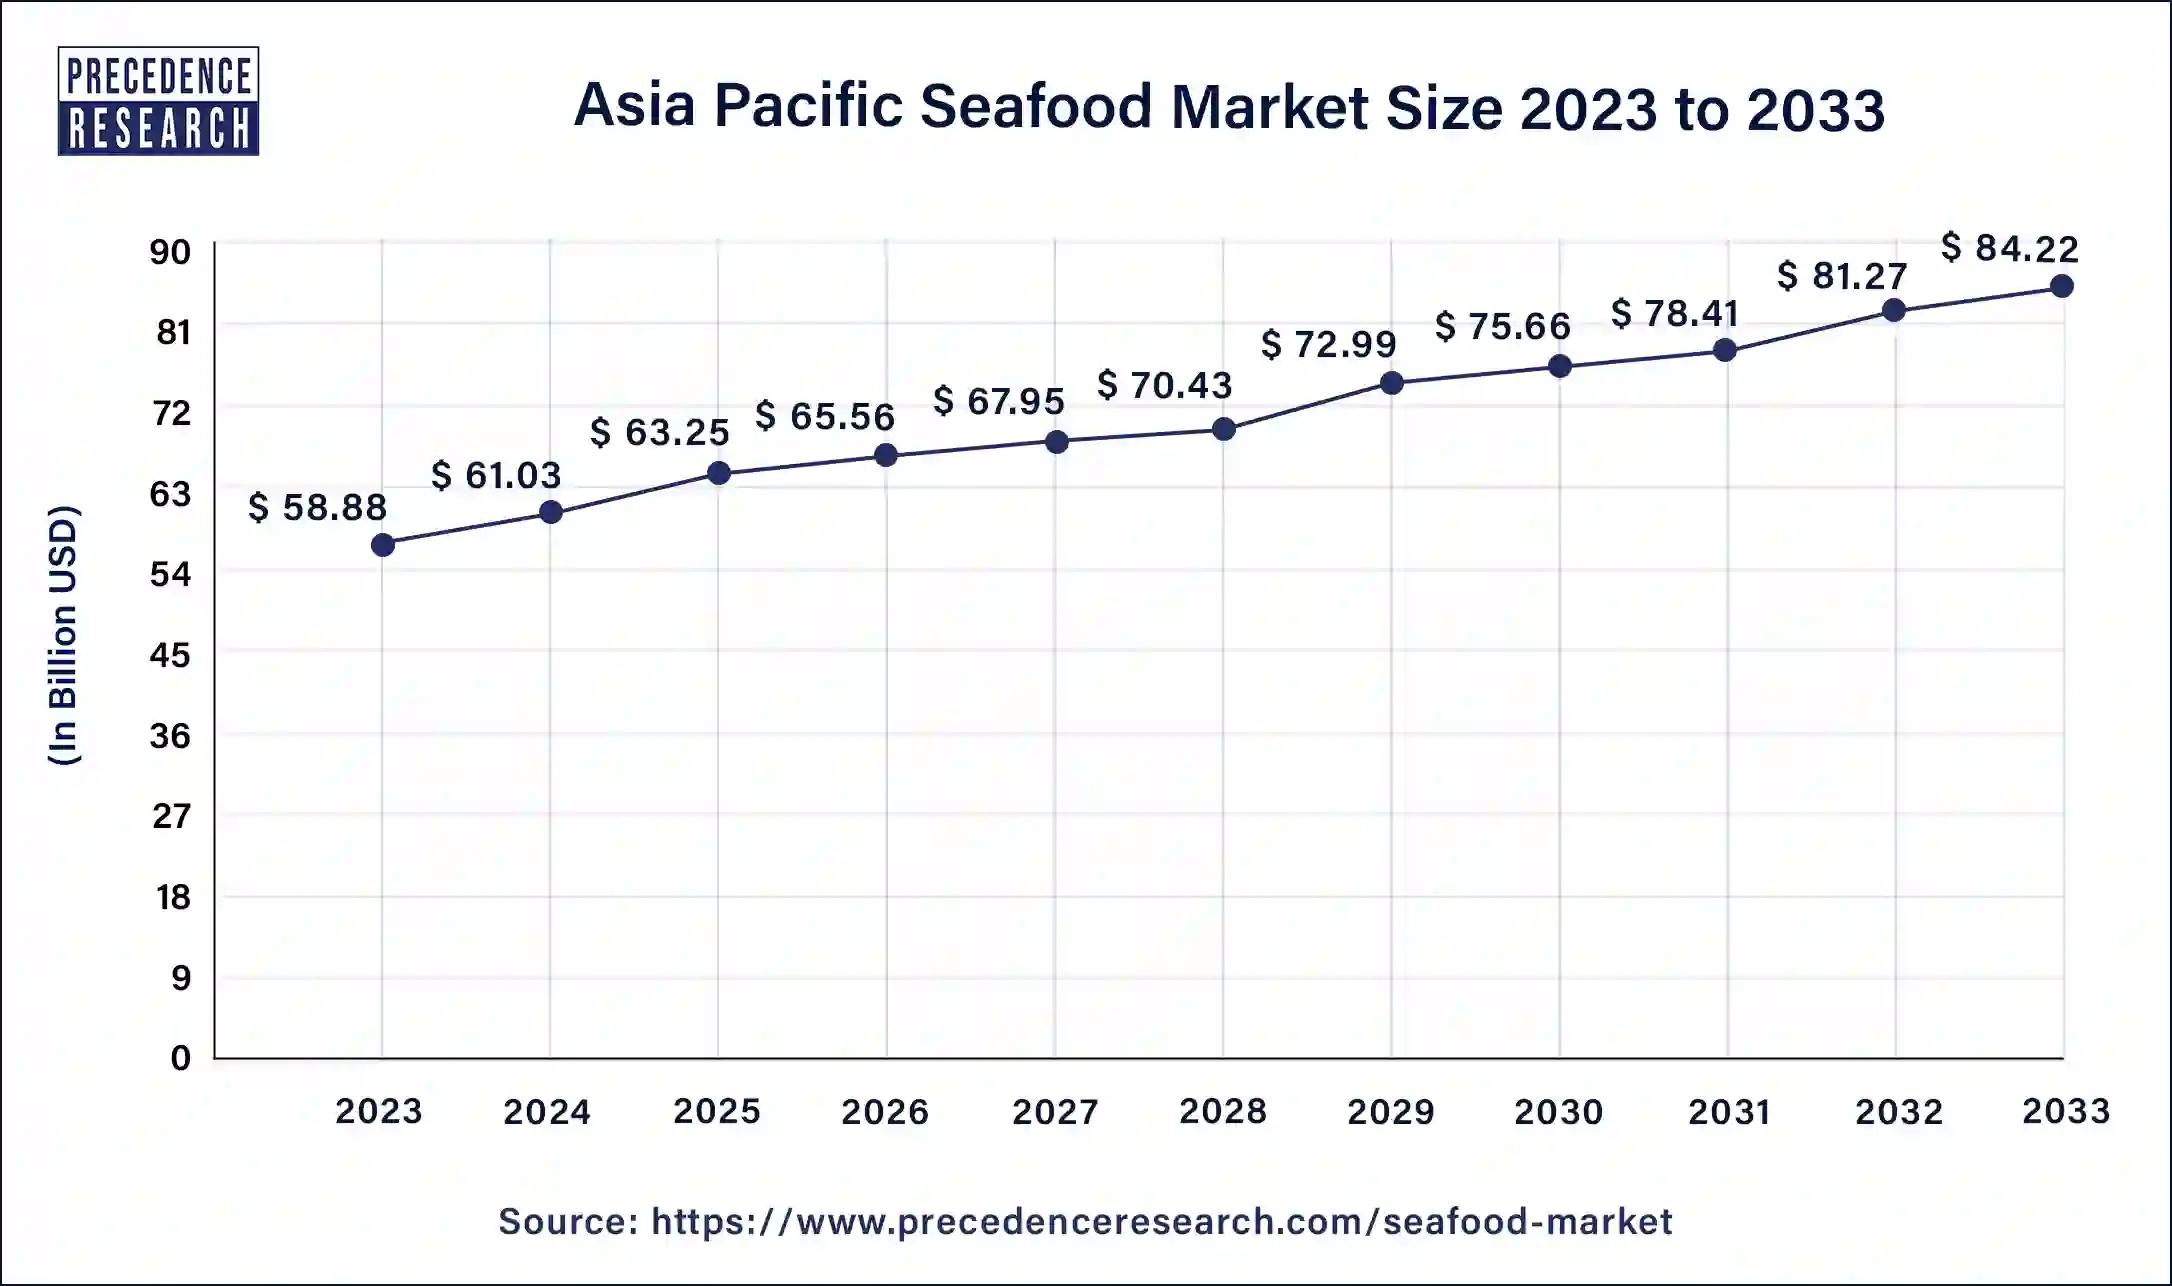 Asia Pacific Seafood Market Size 2024 to 2033